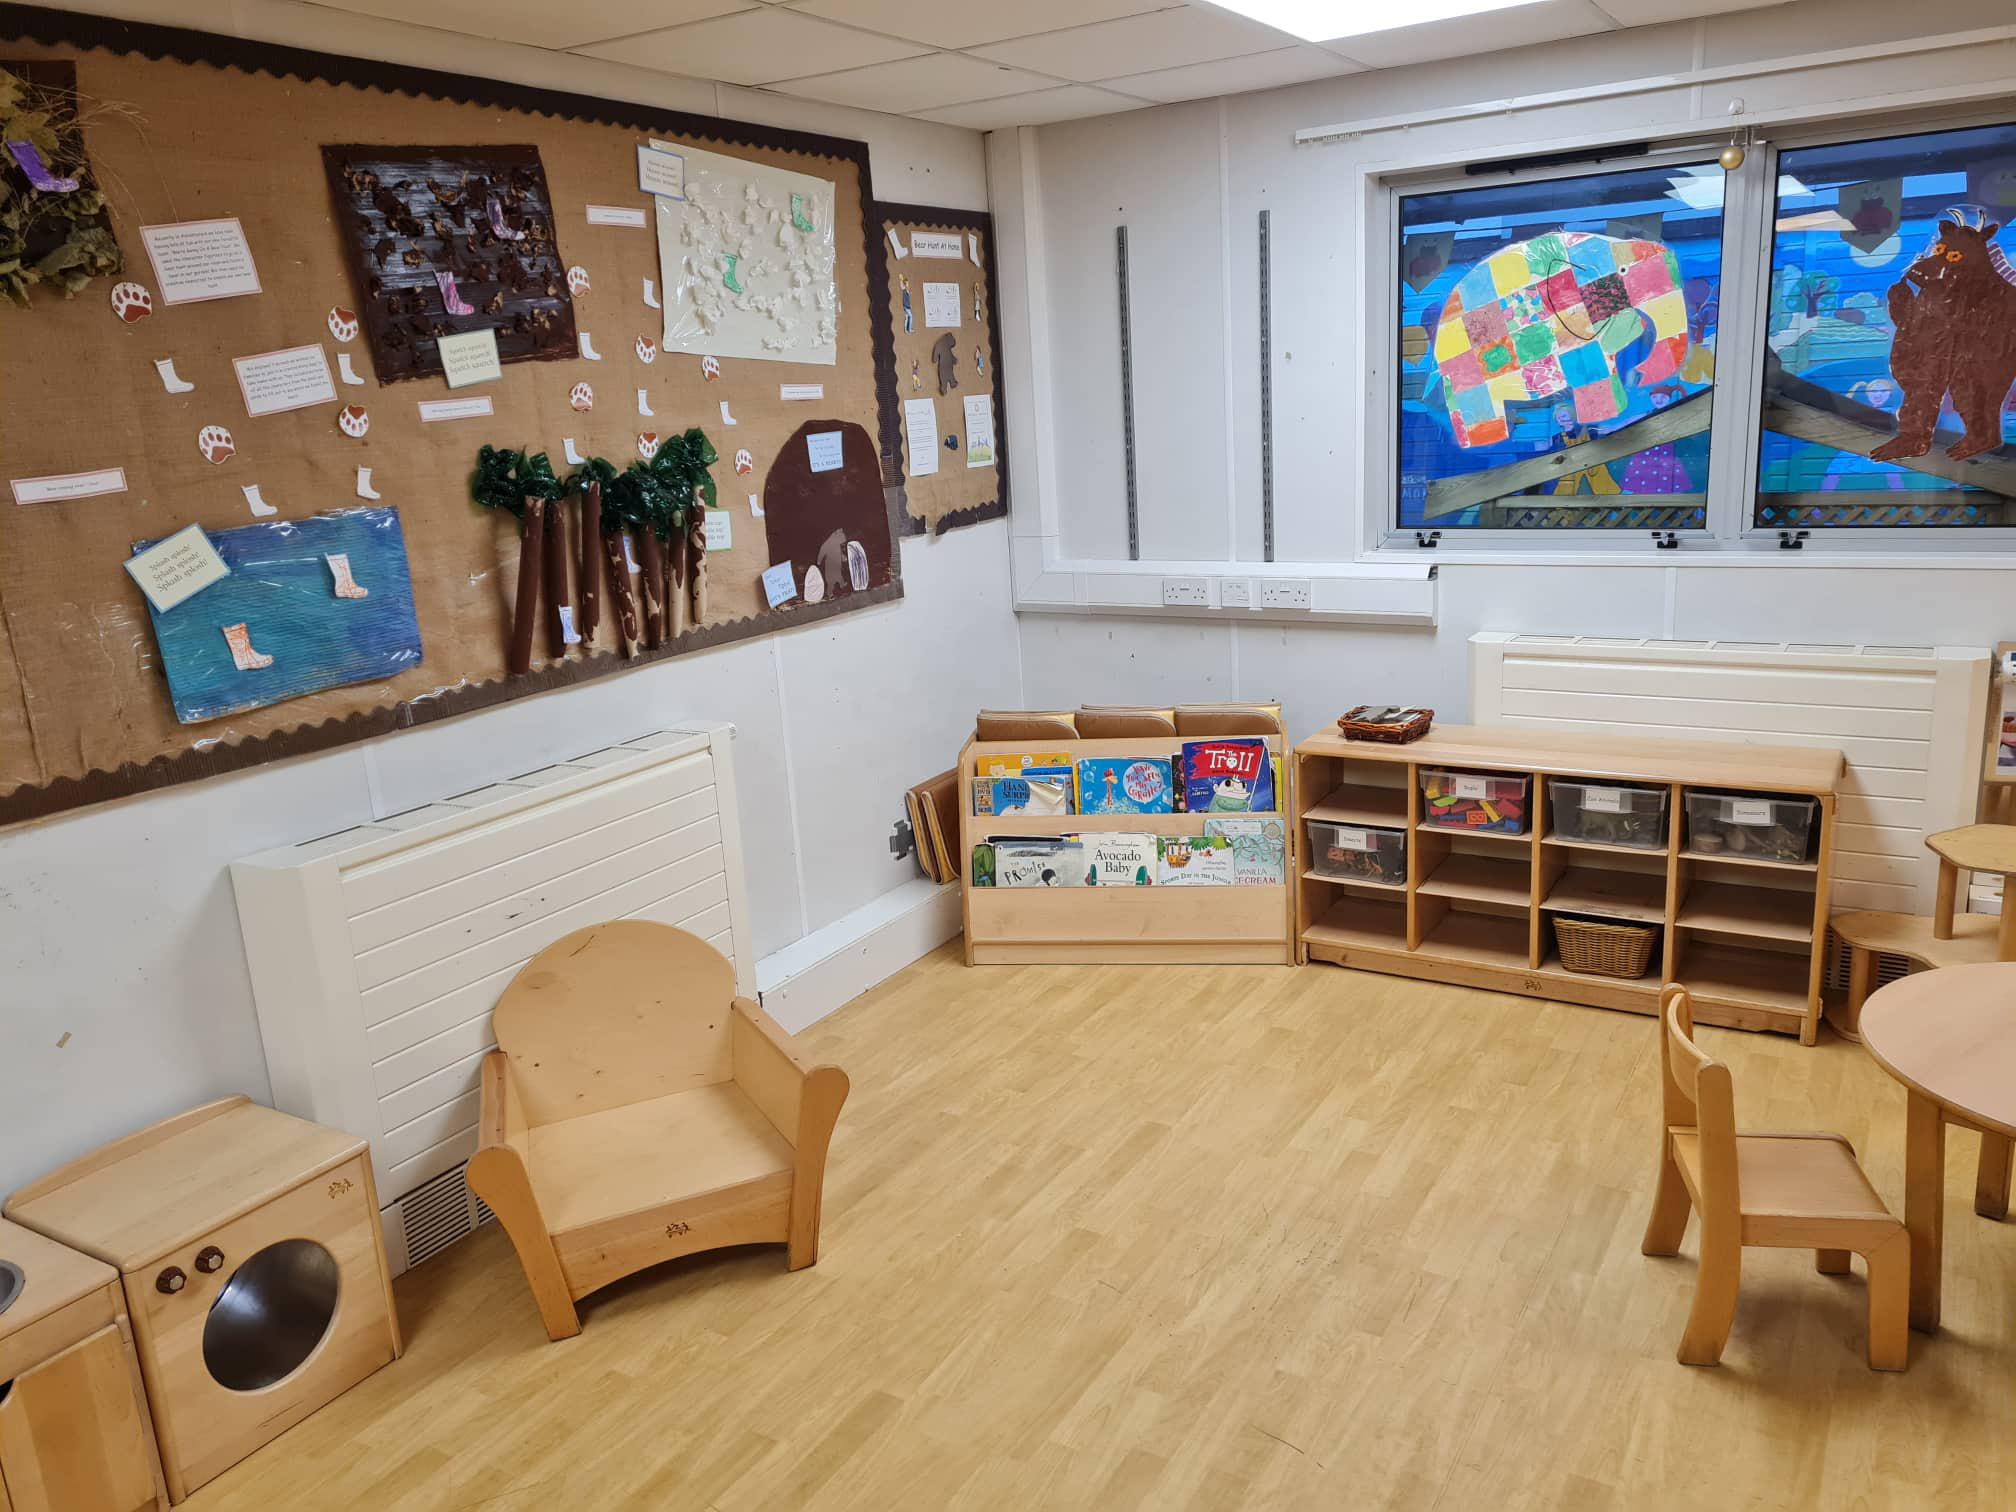 Images Bright Horizons Quayside Day Nursery and Preschool